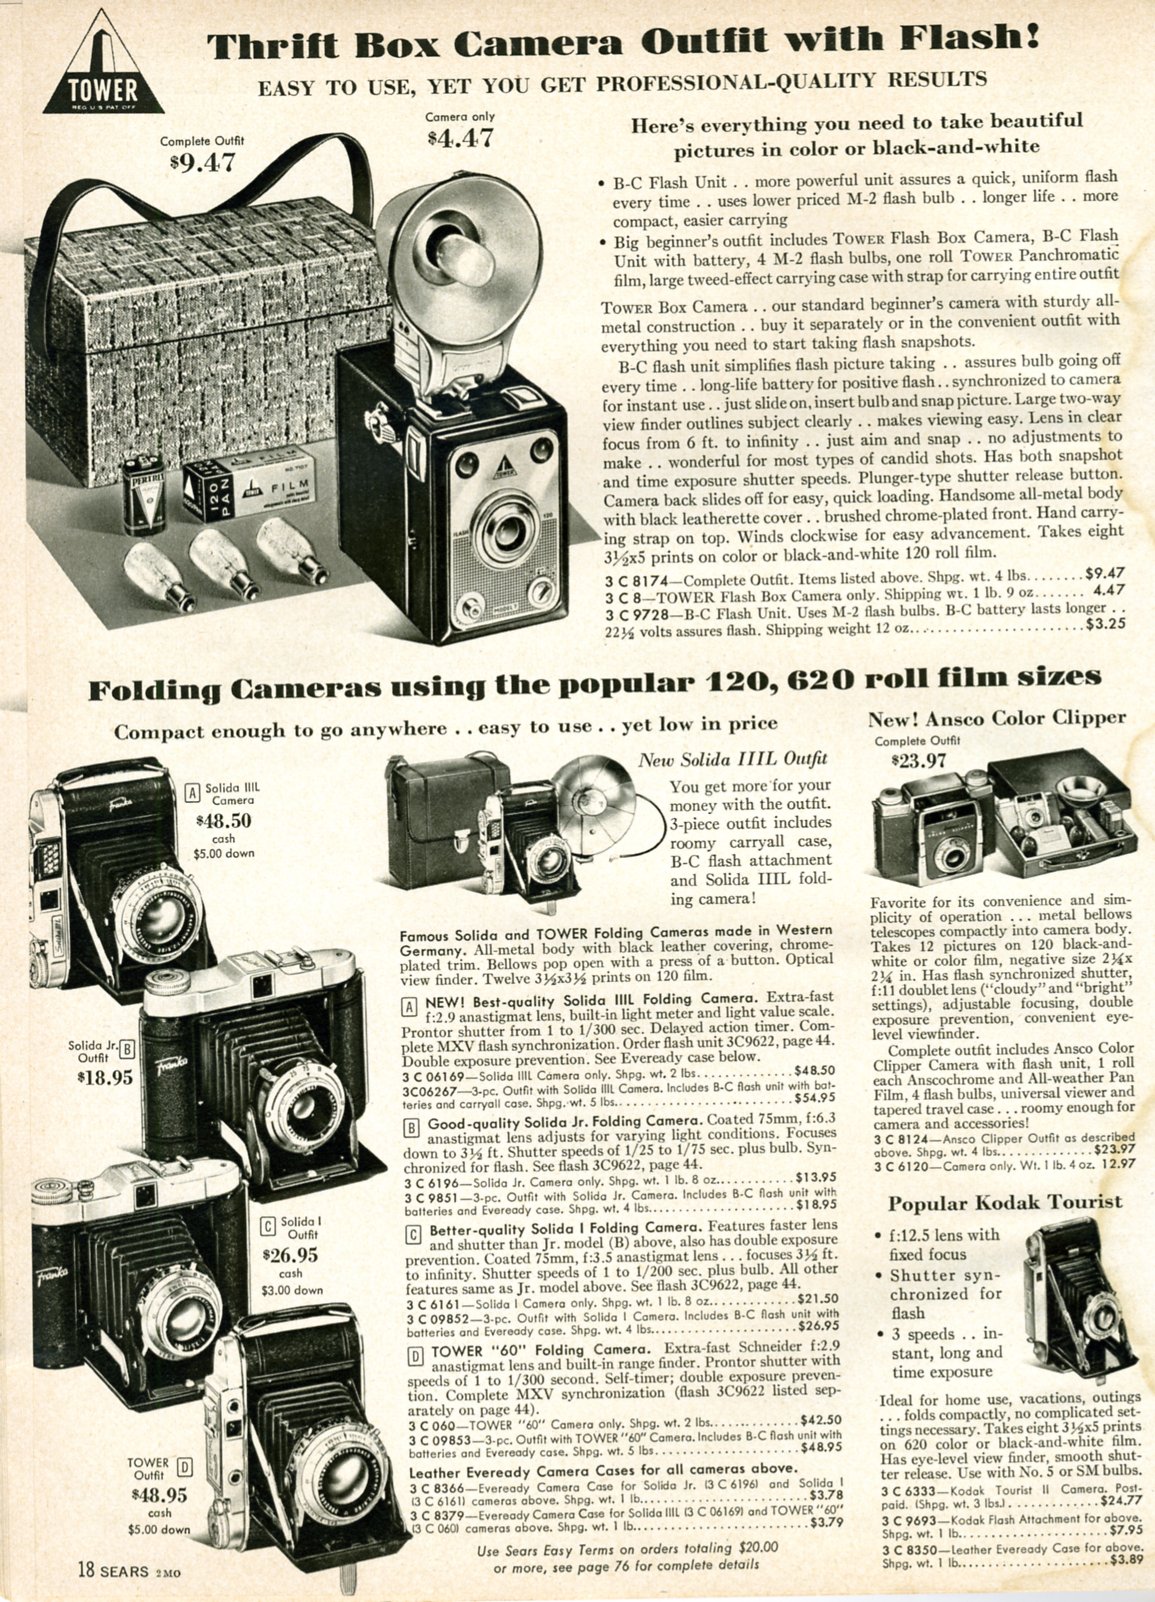 an advertit with different cameras in it